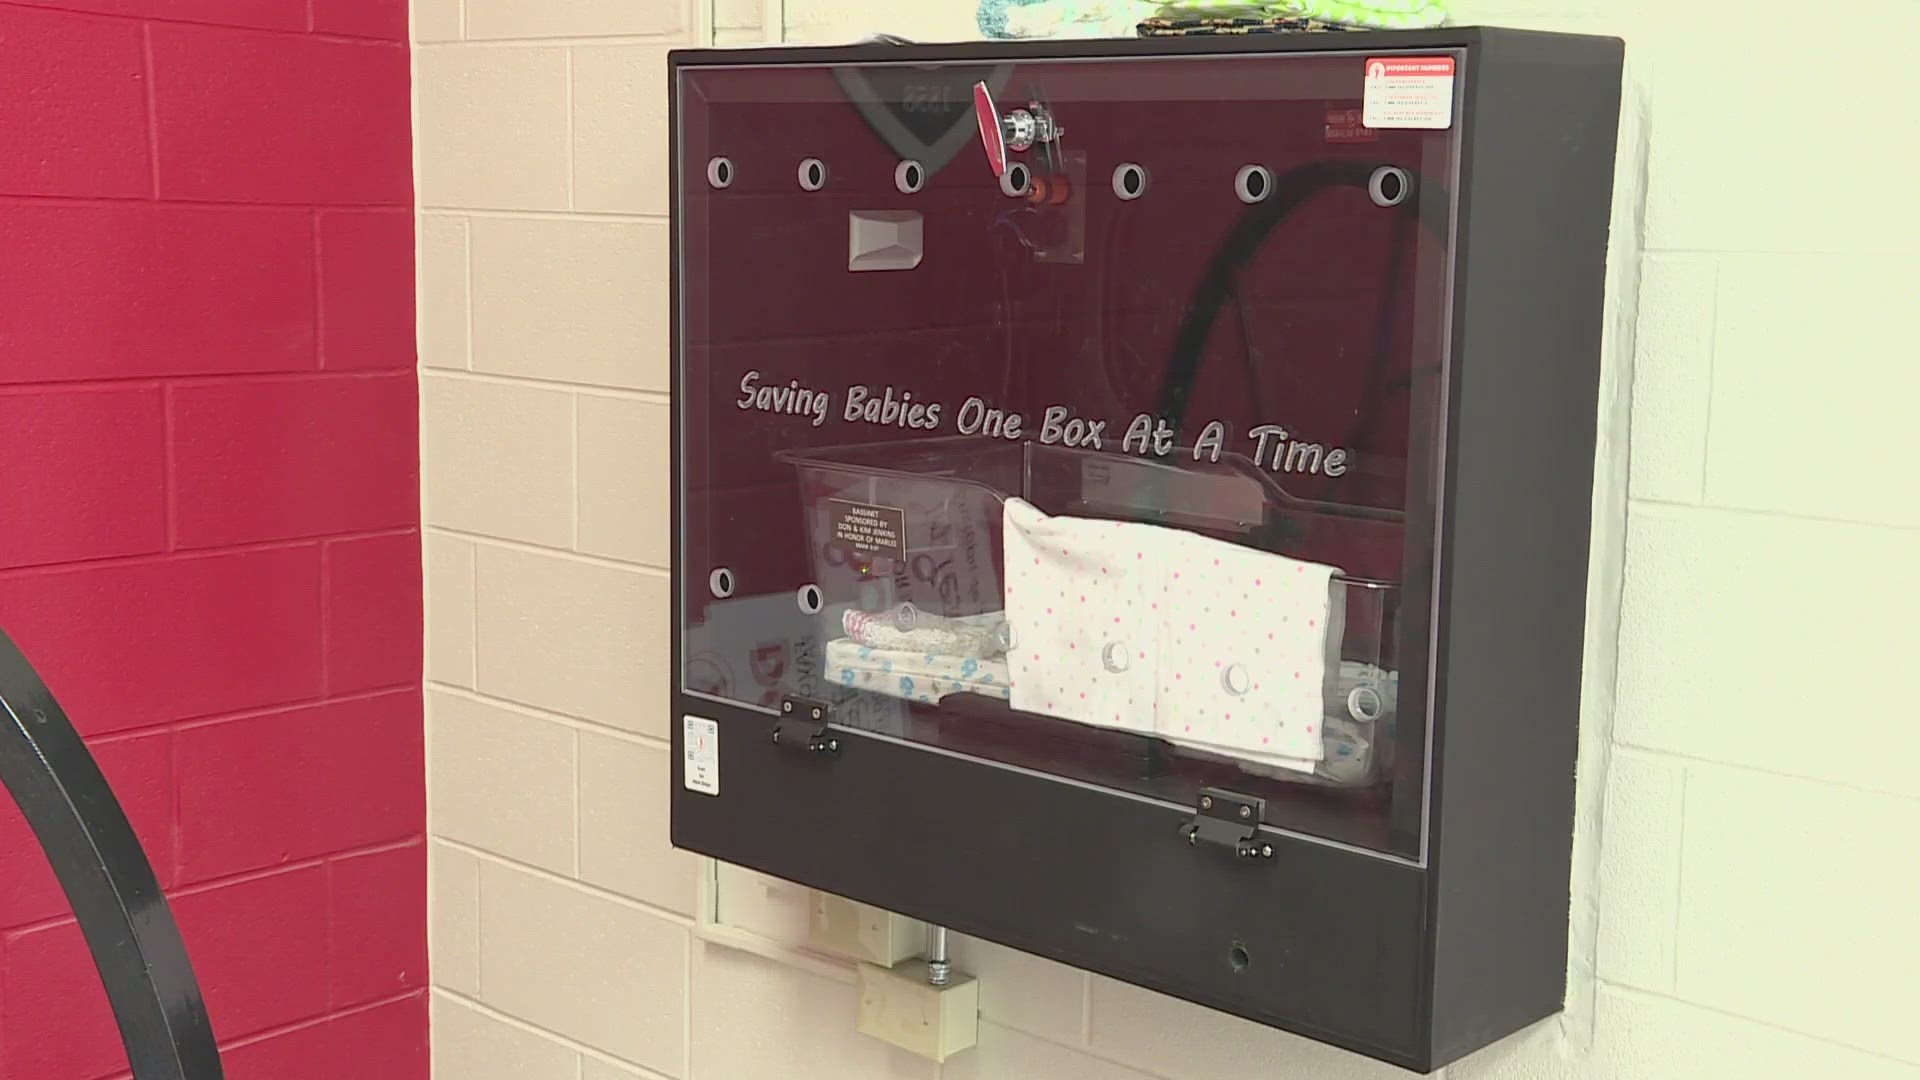 This new baby box in Beechmont marks the 220th in the nation and the 34th in Kentucky.